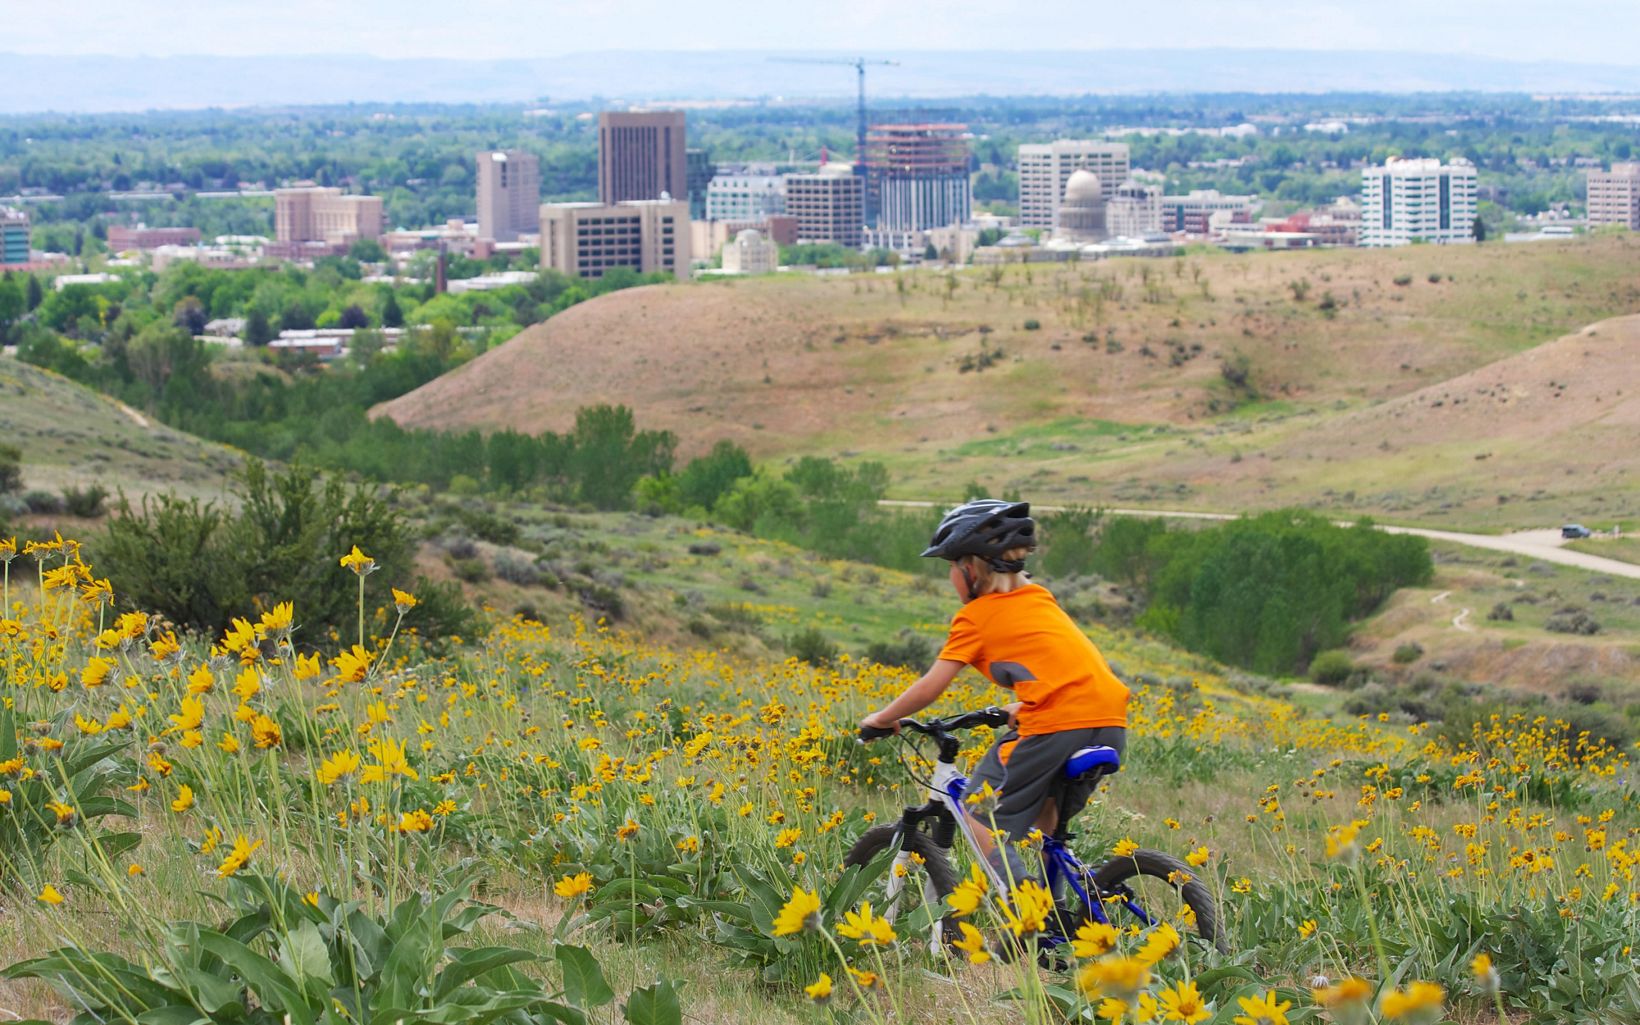 child on a bike rides through hills overlooking city of boise